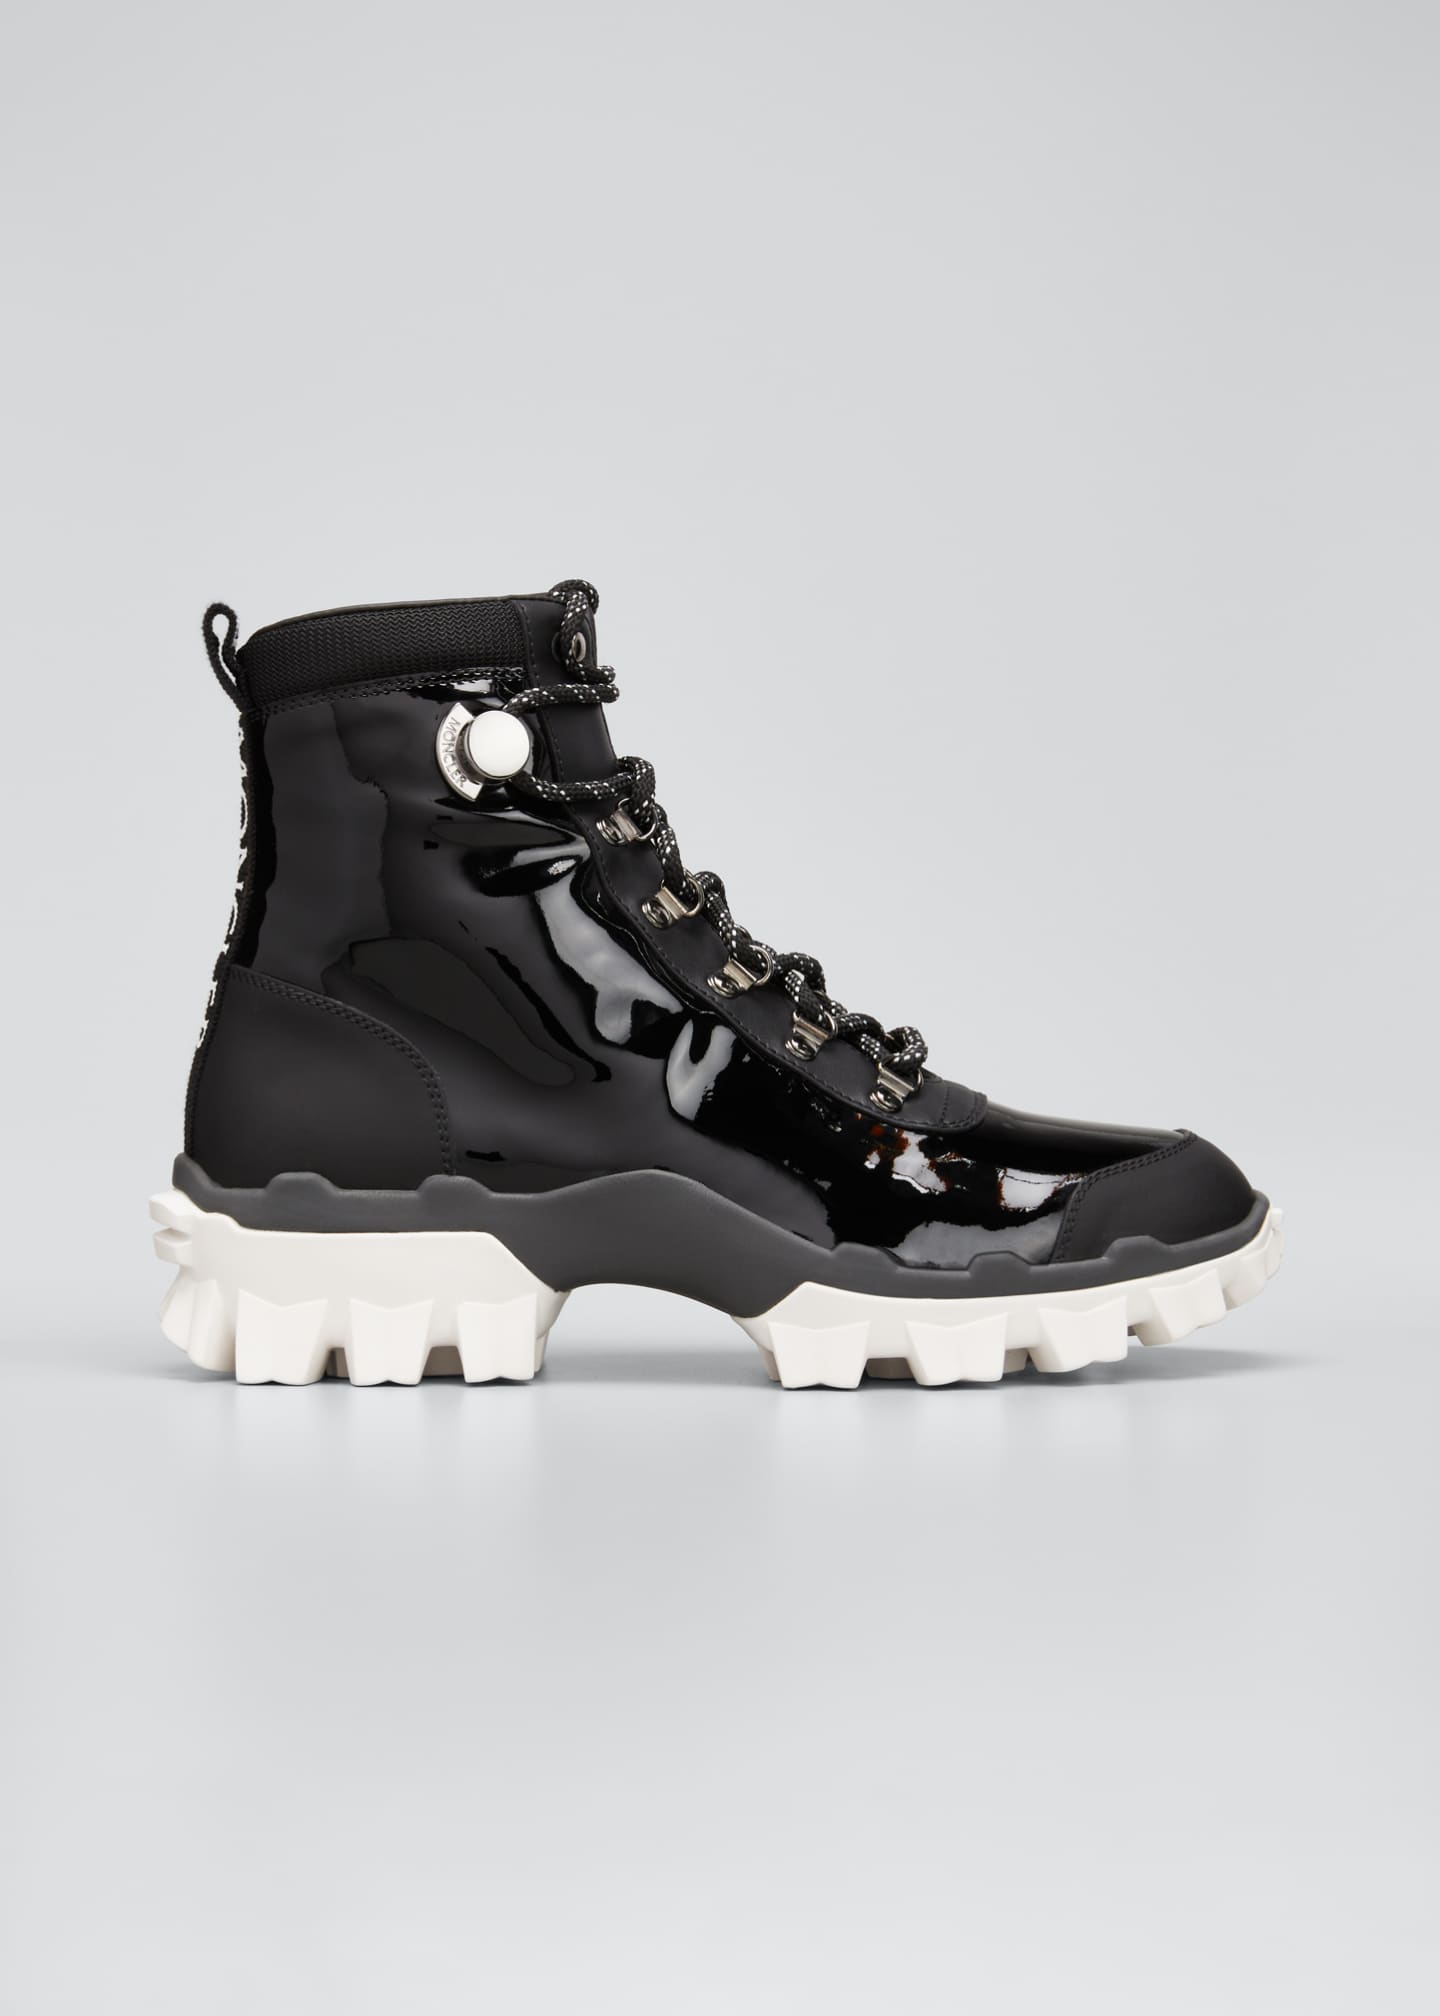 Moncler Helis Stivale Leather Lace-Up Hiking Boots - Bergdorf Goodman